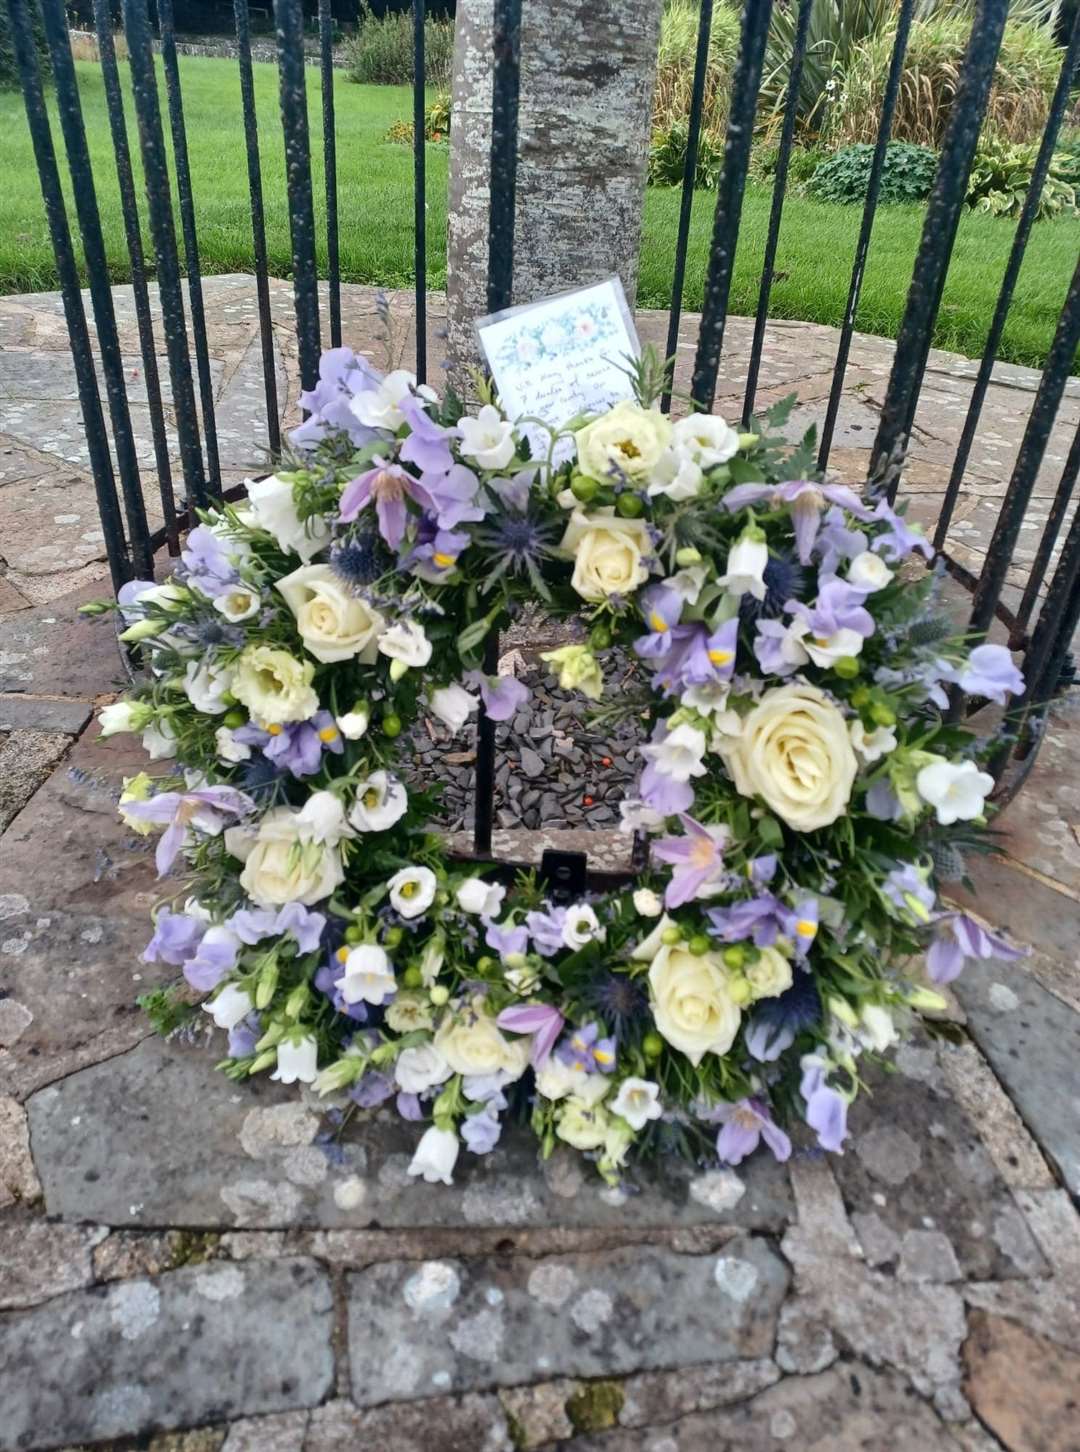 The wreath at the Wick garden of remembrance.